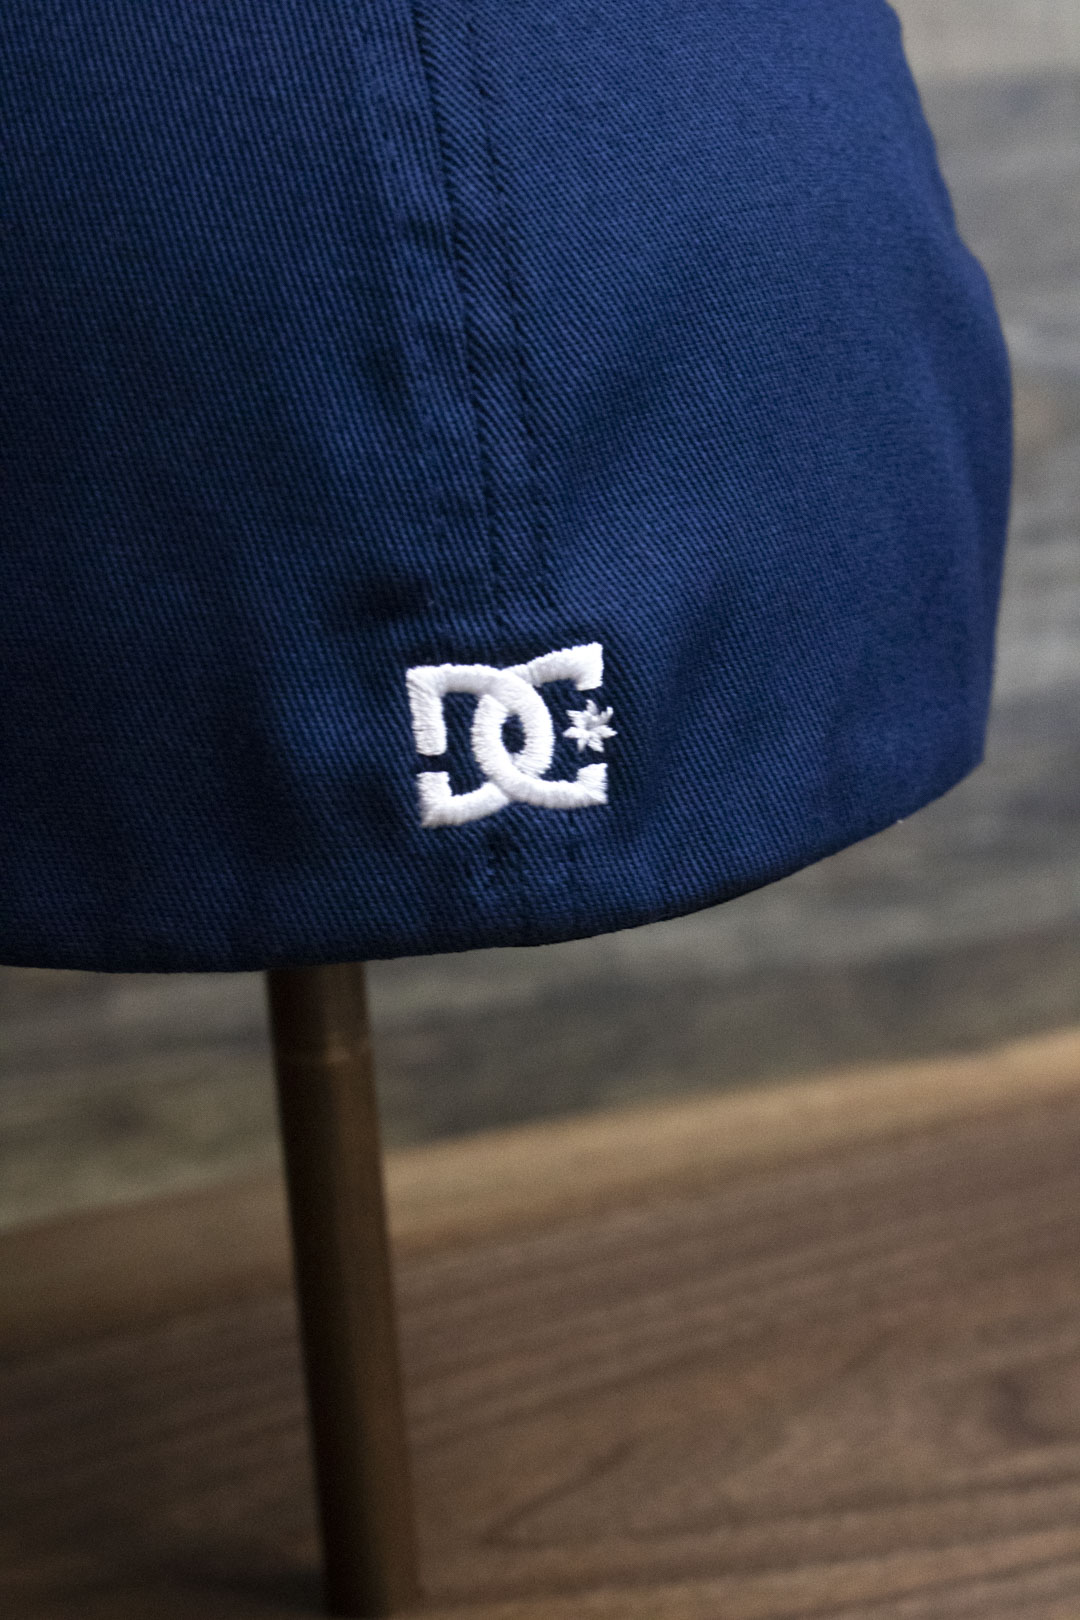 the back of the Navy Blue Skater Hat | DC Shoes Blue Bottom Navy Flexfit Cap has a tiny DC Shoes logo on it